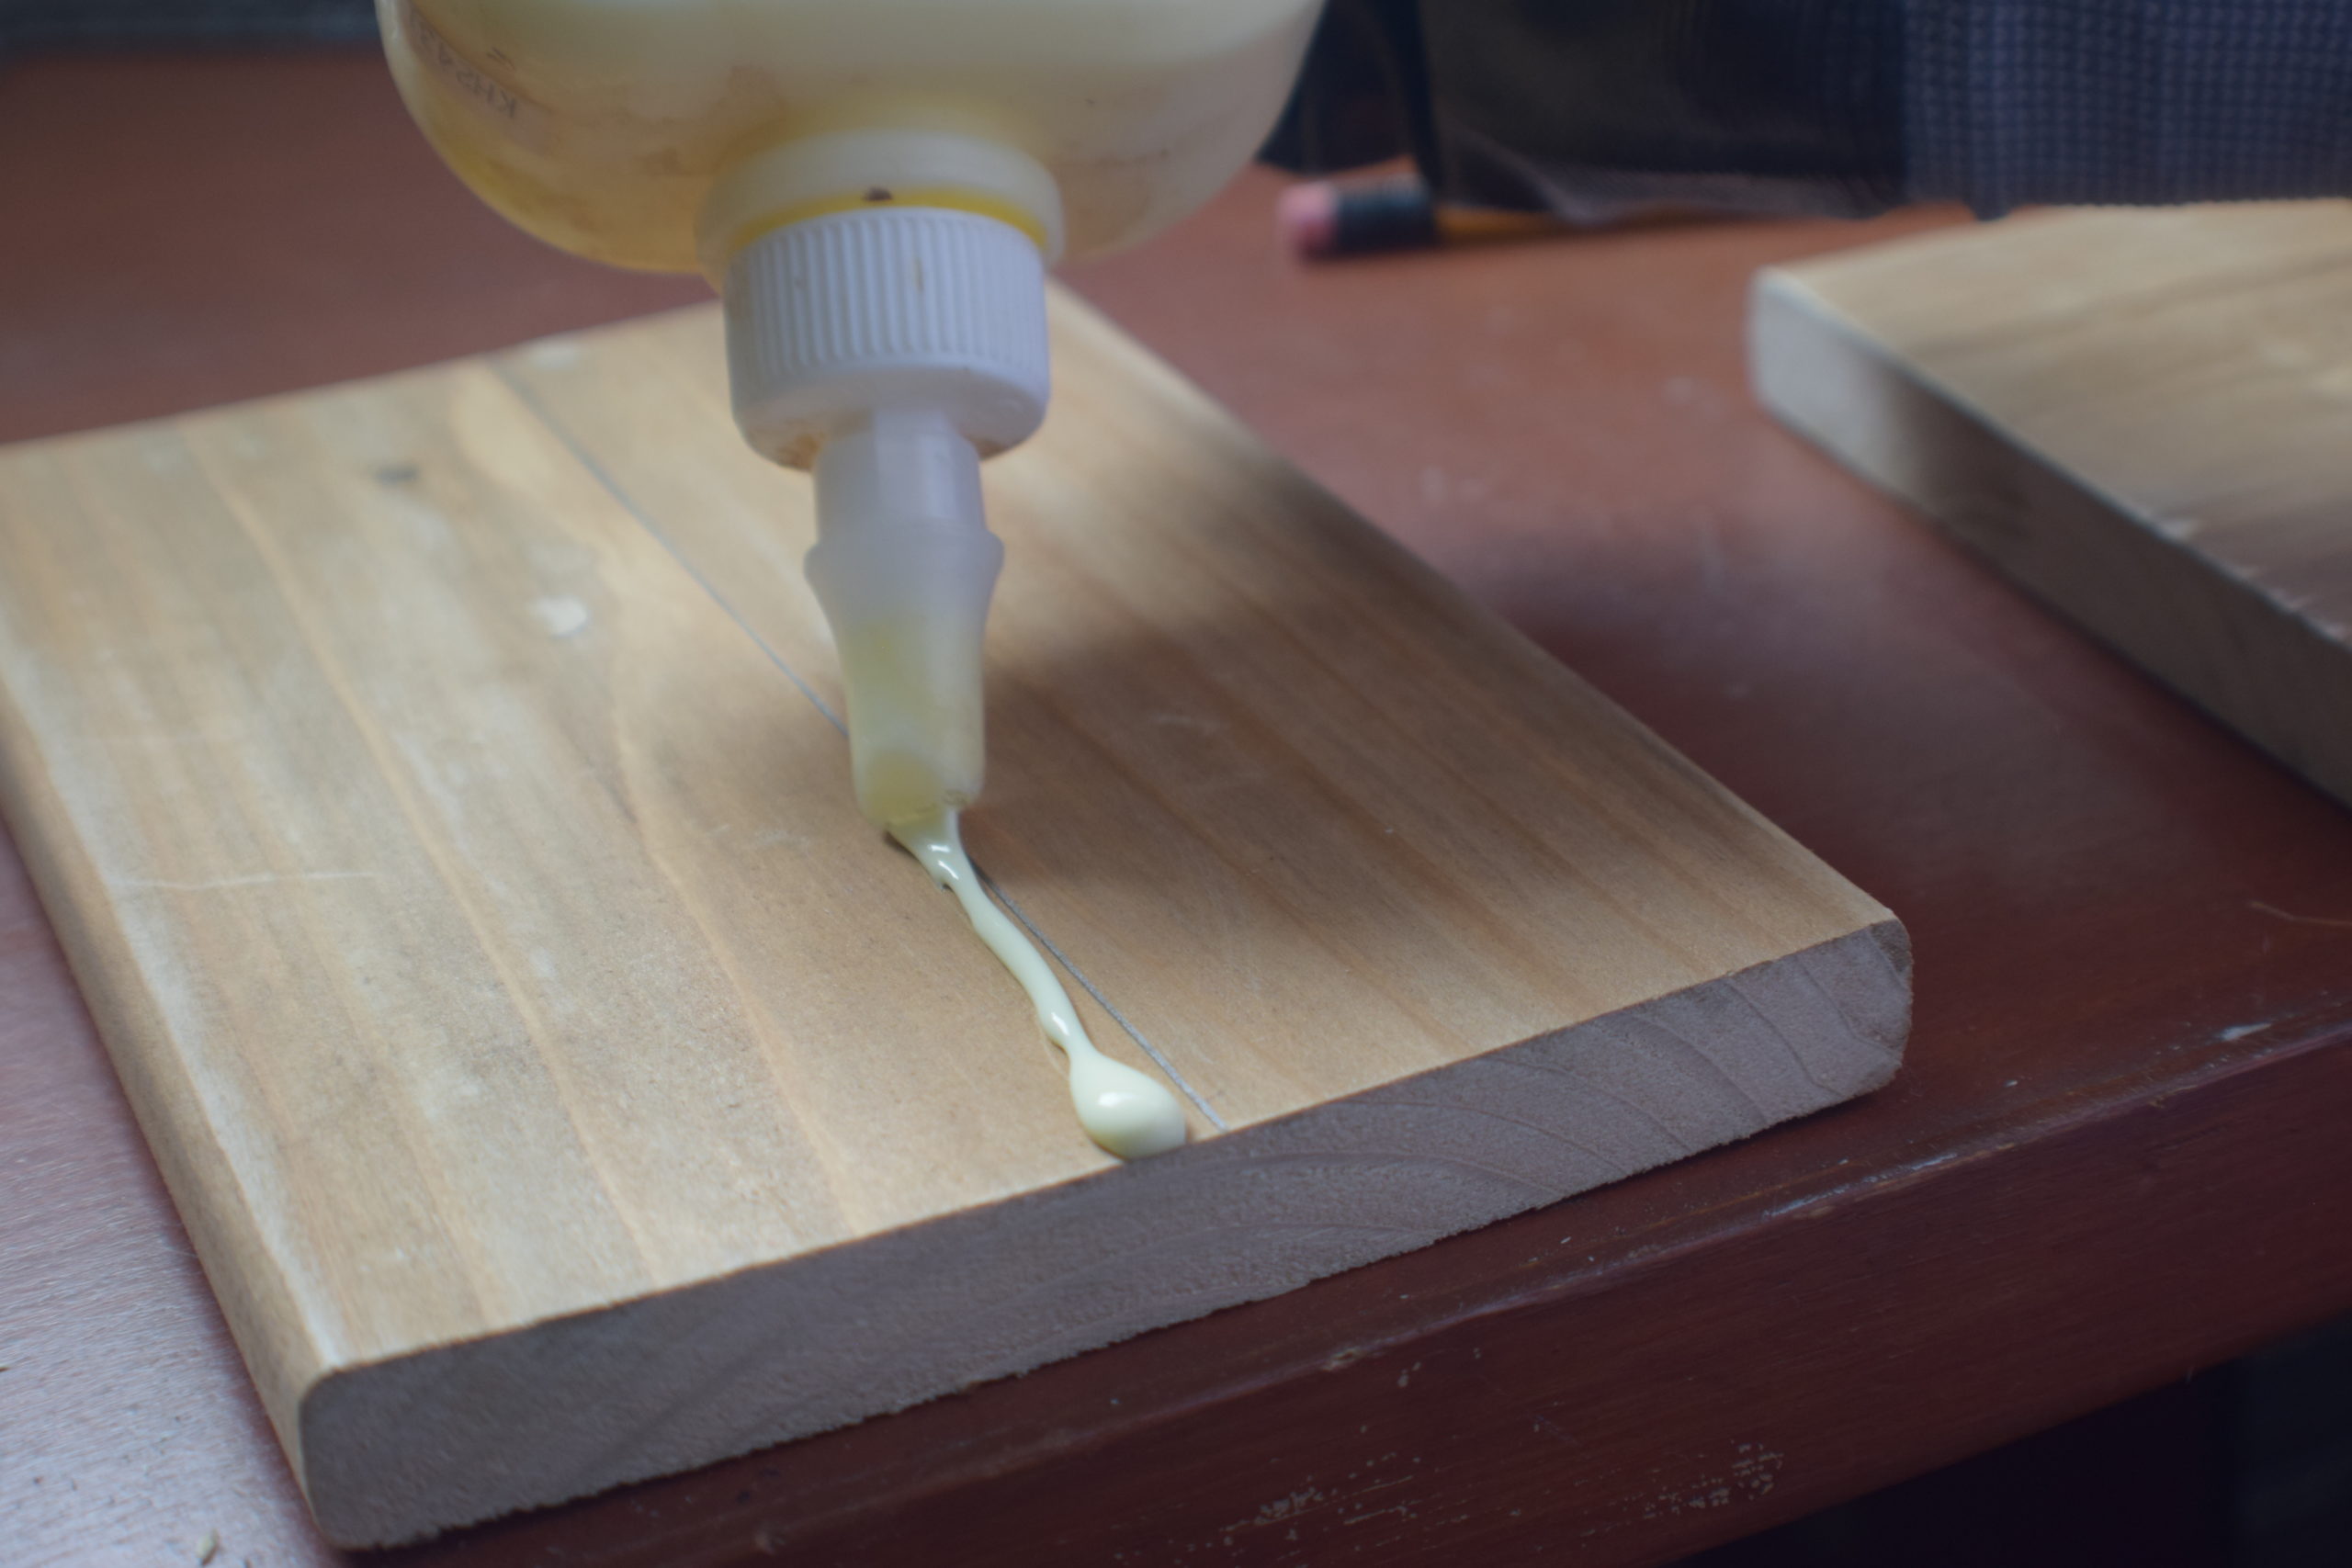 Wood glue being applied to a penciled line on wood